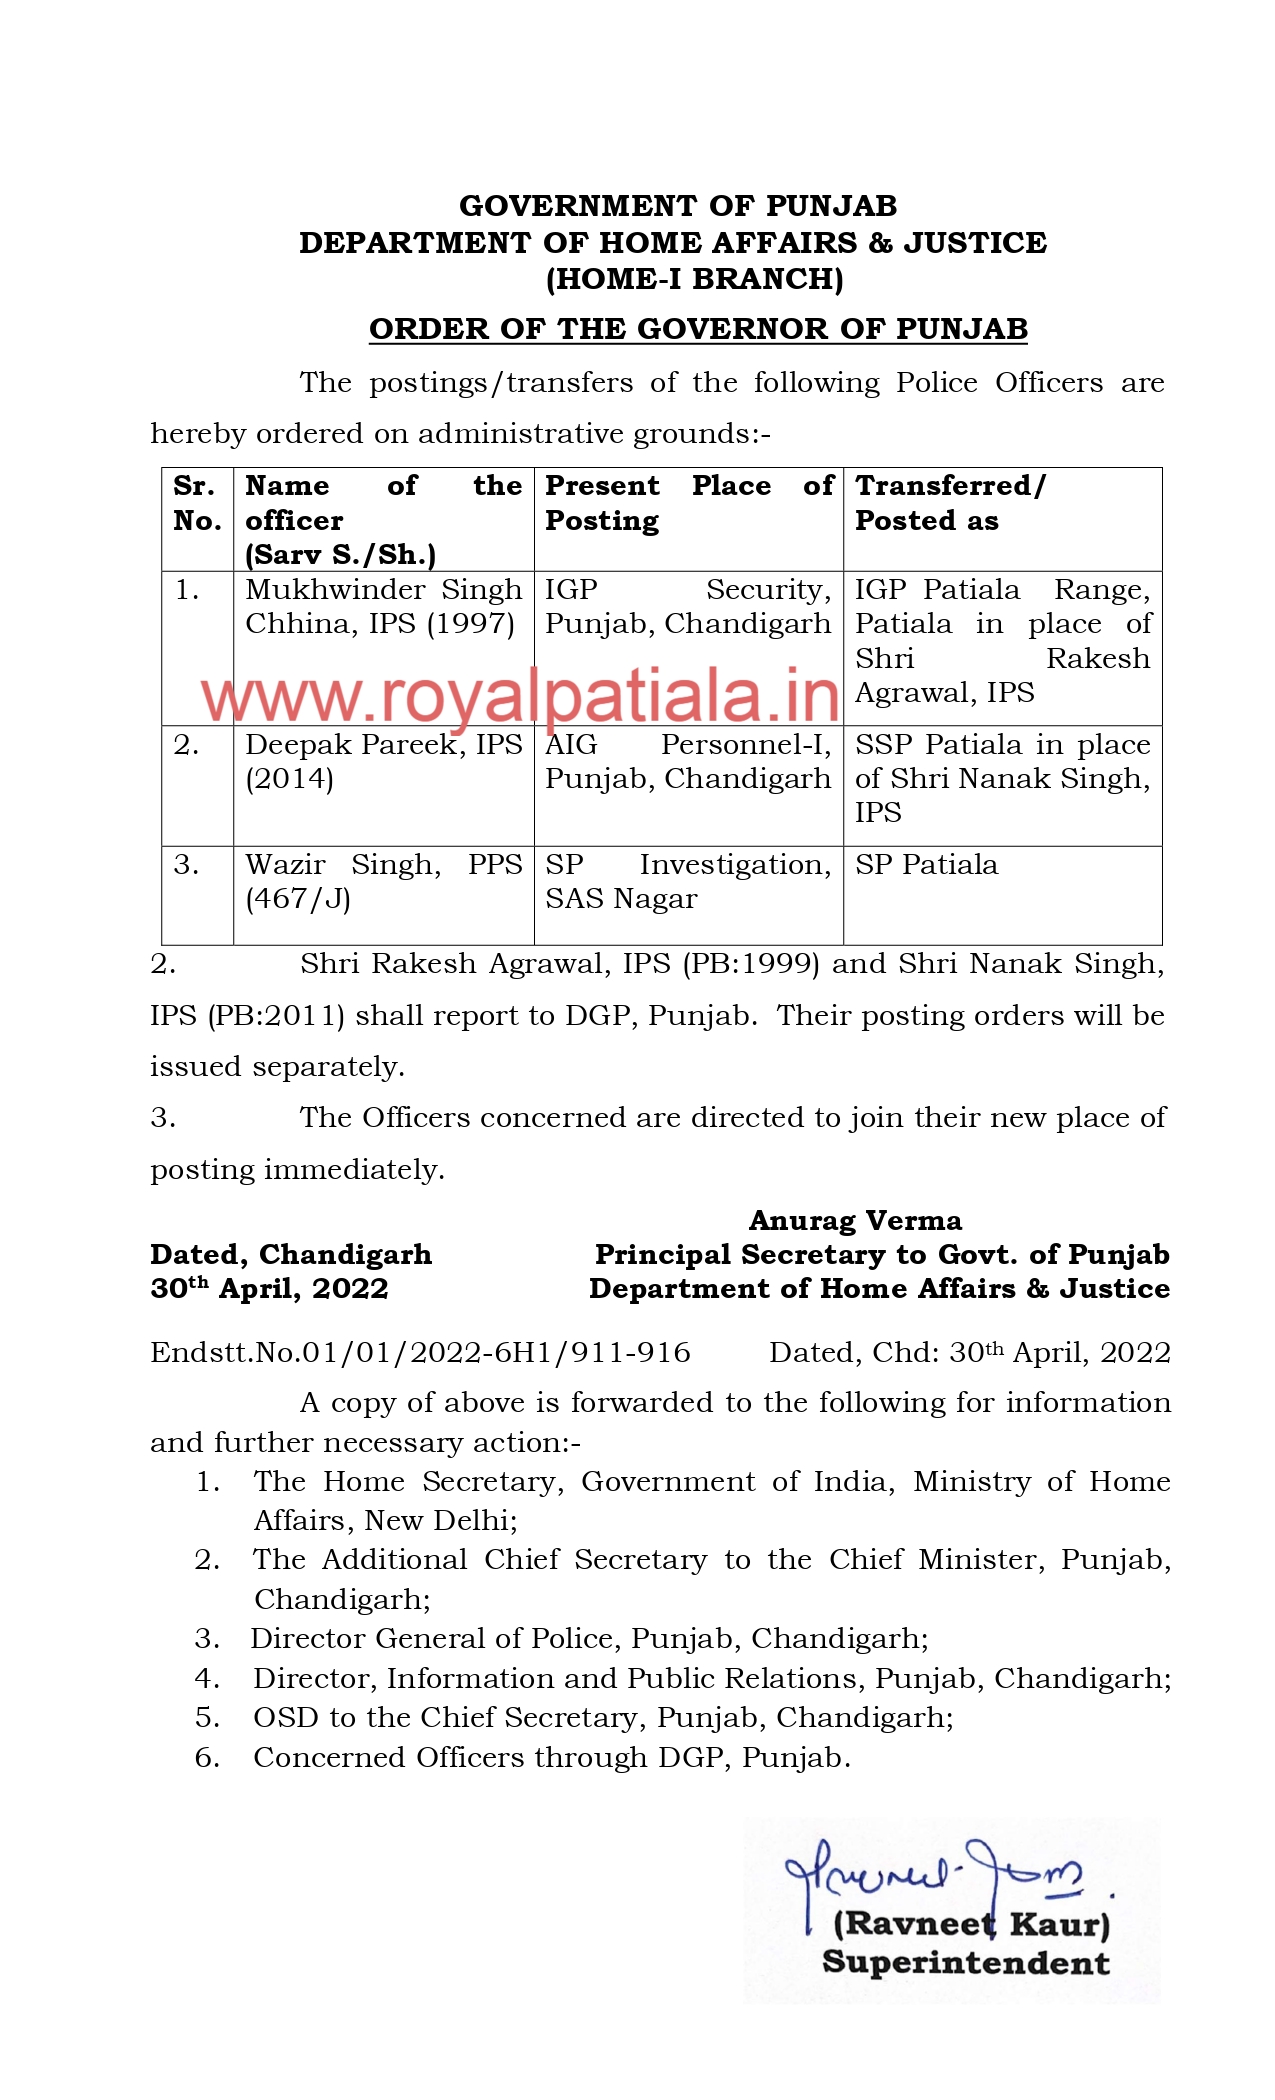 IPS-PPS transferred in Punjab